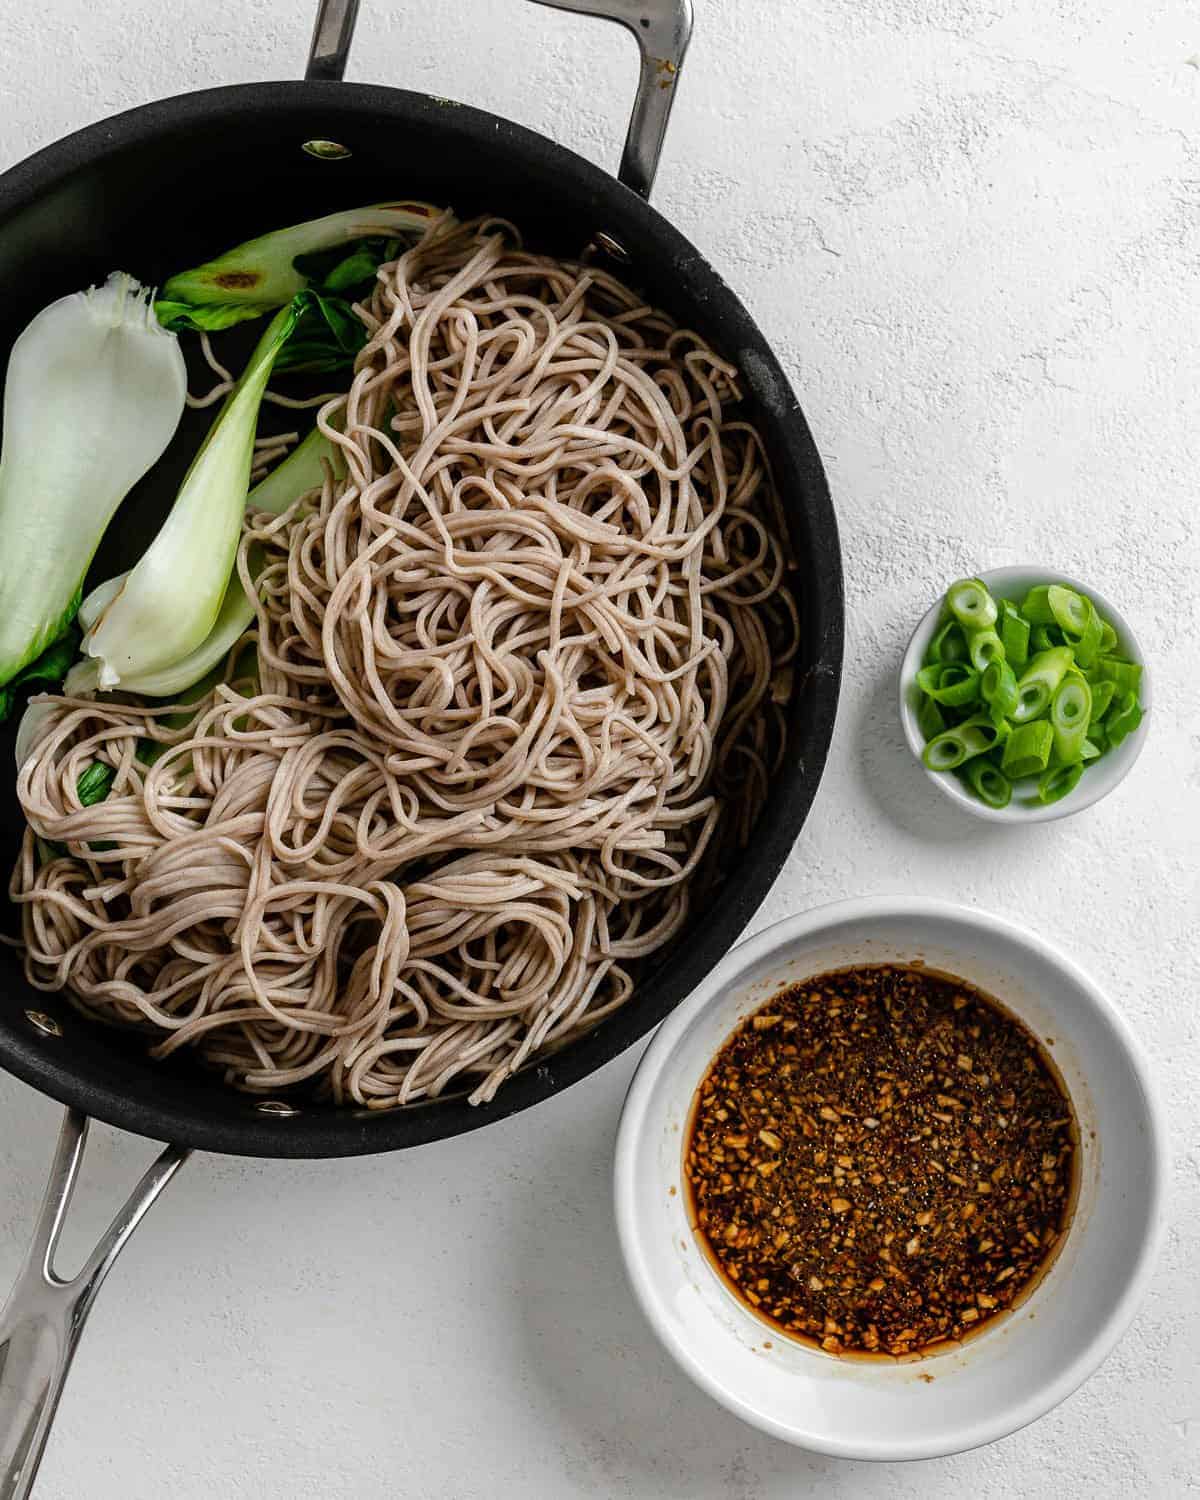 process of addition of soba noodles with veggies in black pan against a white background